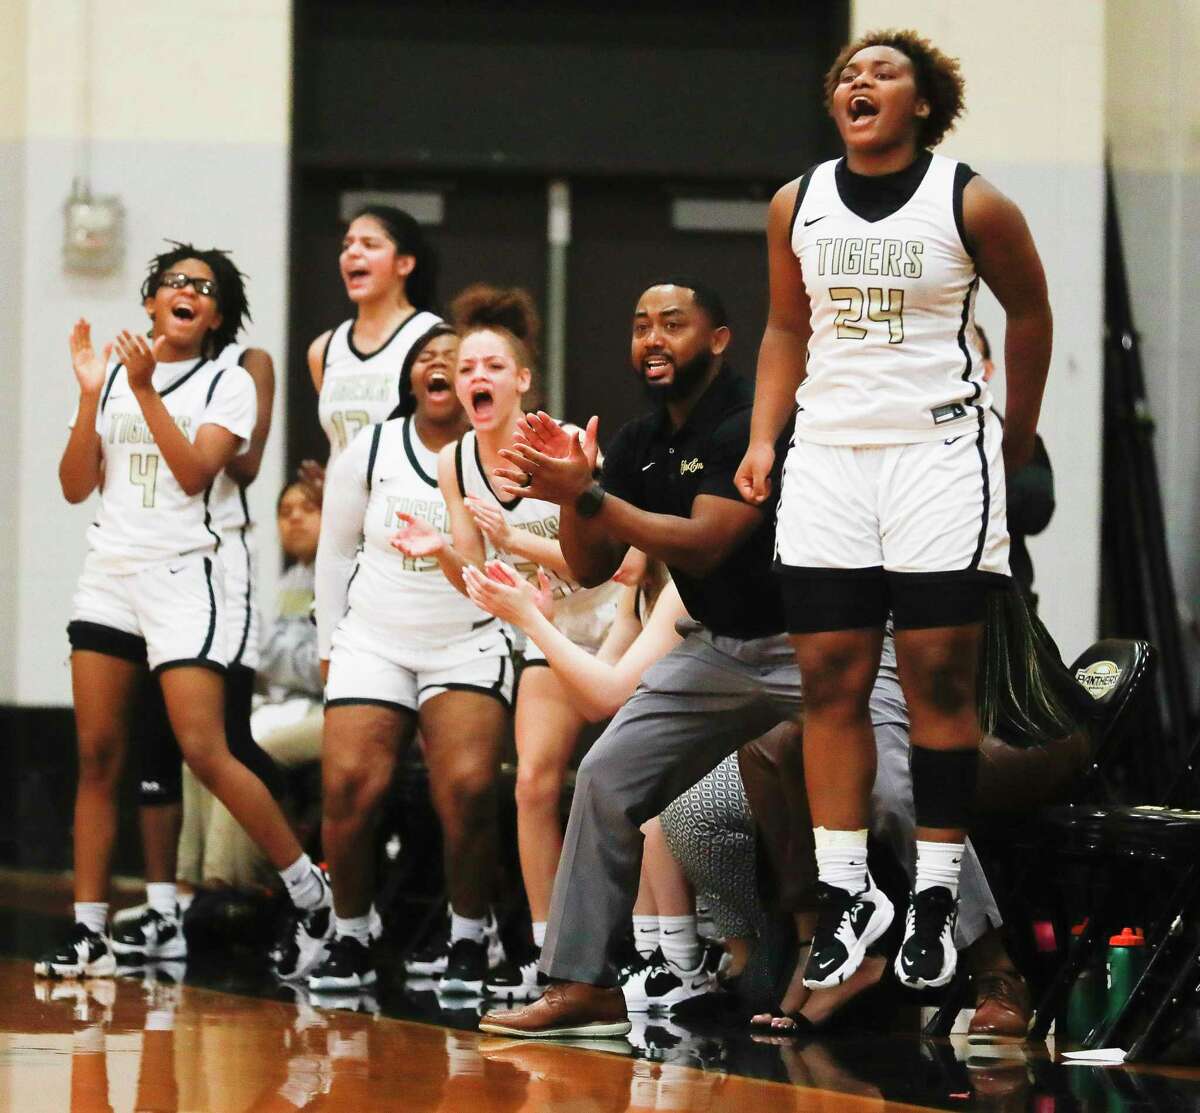 Conroe’s Ra’Niyah Castille (24) reacts after a basket beside teammates during the second quarter of a area high school basketball playoff game, Thursday, Feb. 17, 2022, in Spring.